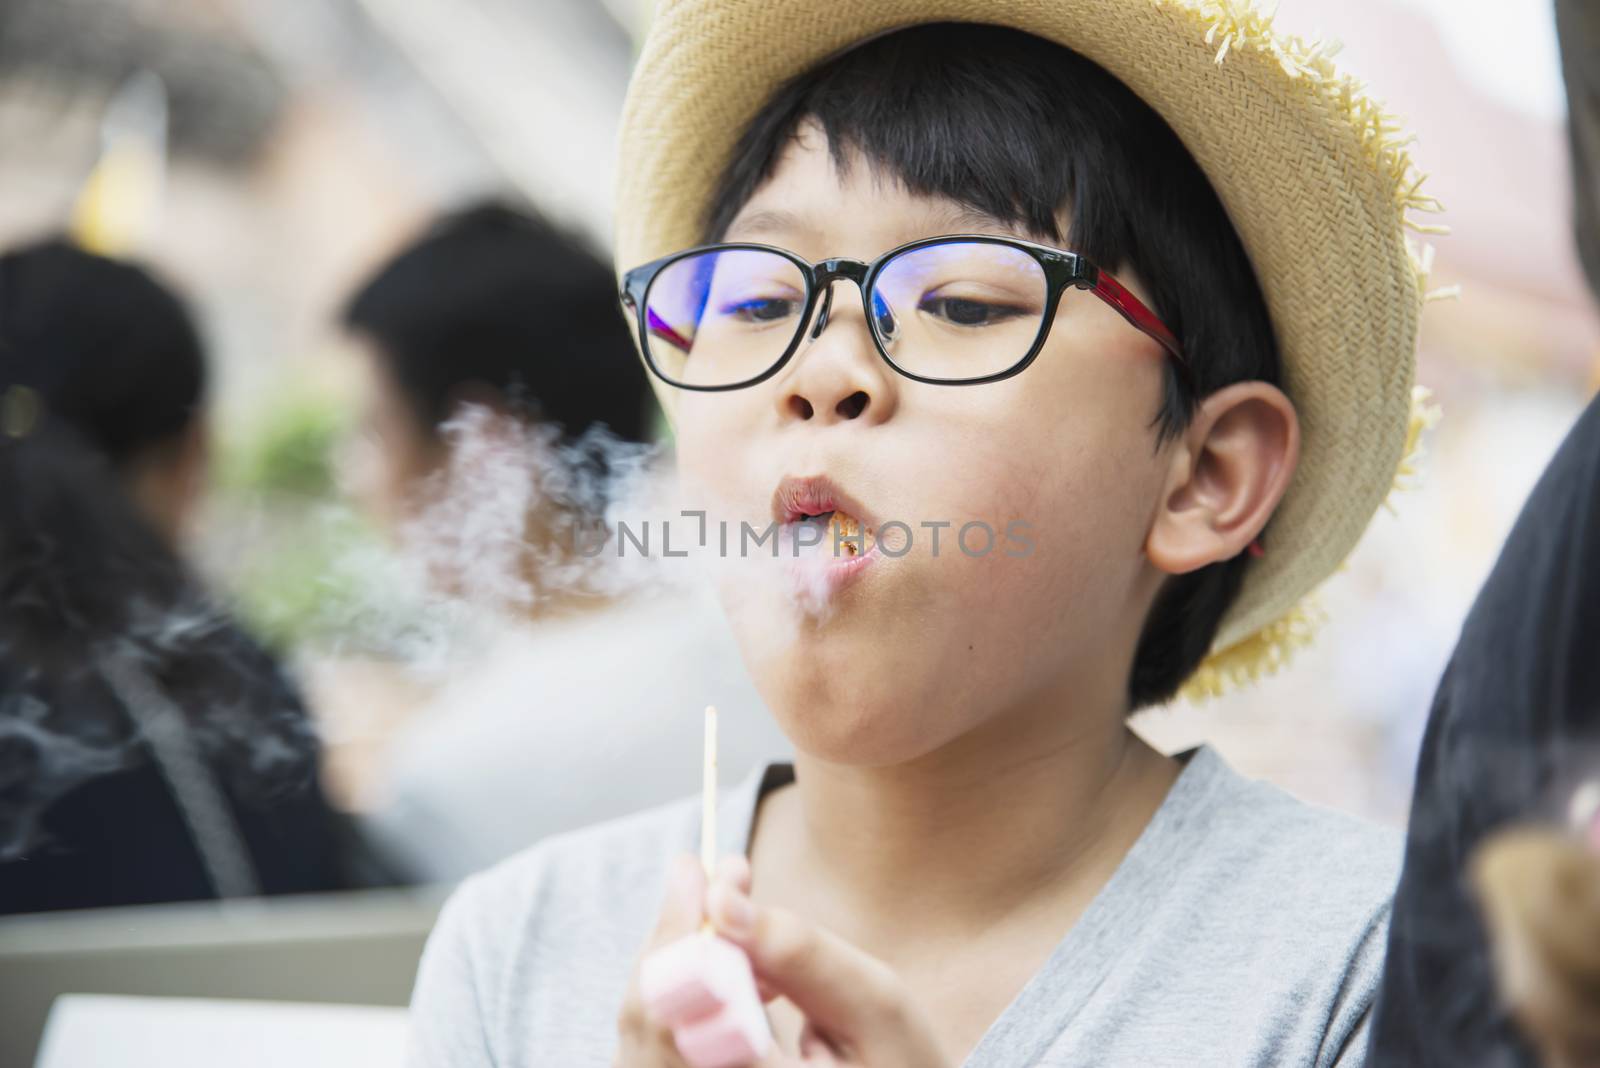 Asian boy eating smoking canny happily - people and snack happy time concept